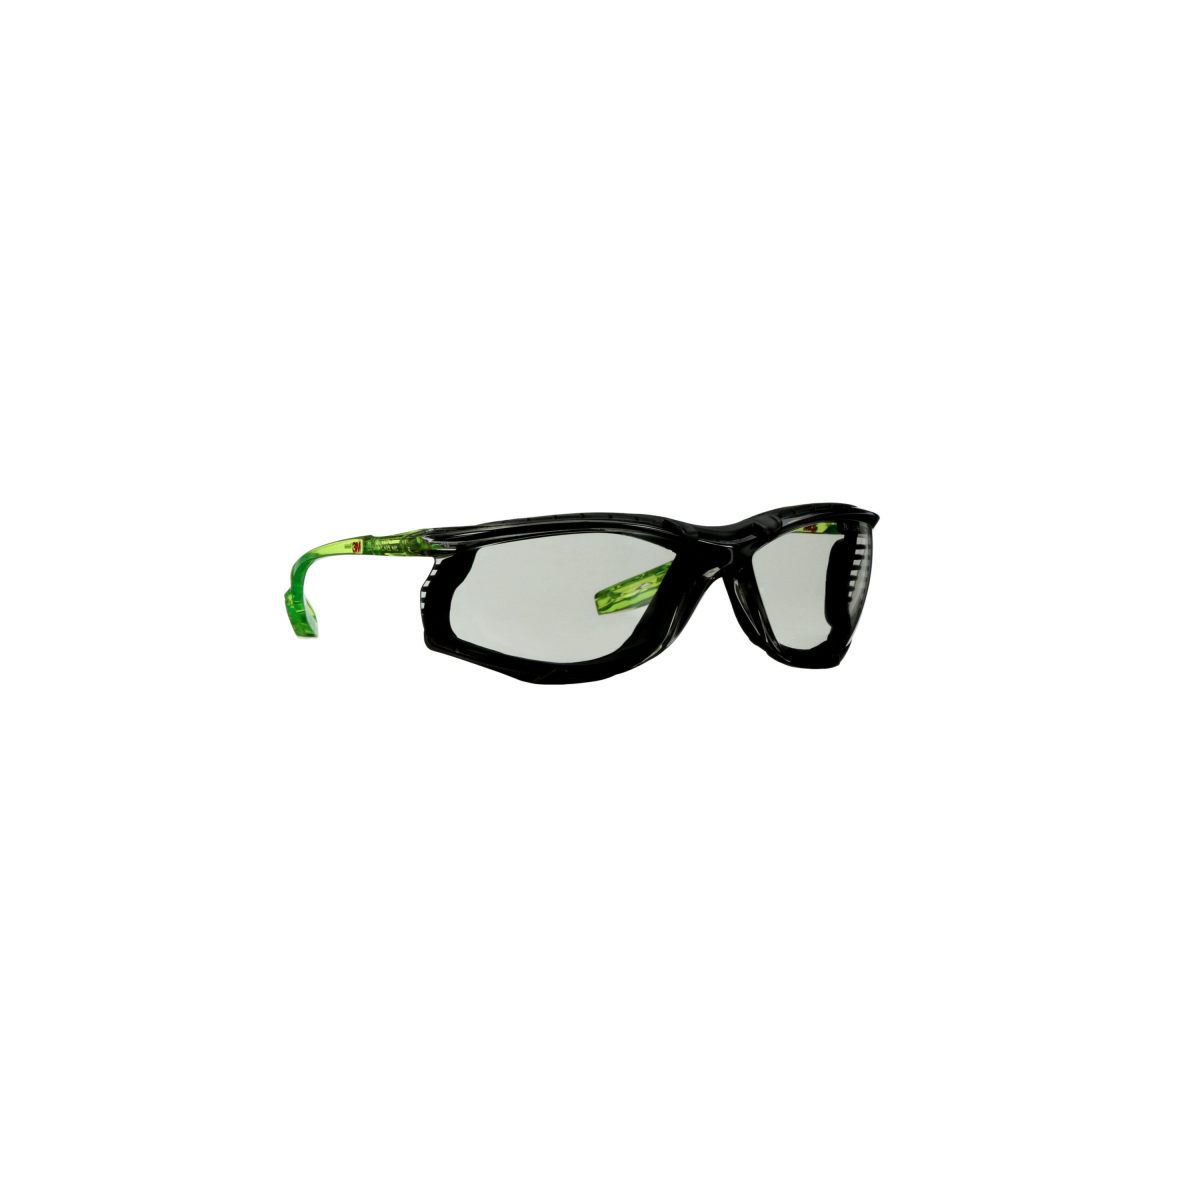 3M™ Solus™ CCS Series Gray And Bright Green Safety Glasses With Gray Scotchgard™ Anti-Fog/Anti-Scratch/Indoor/Outdoor Lens And F